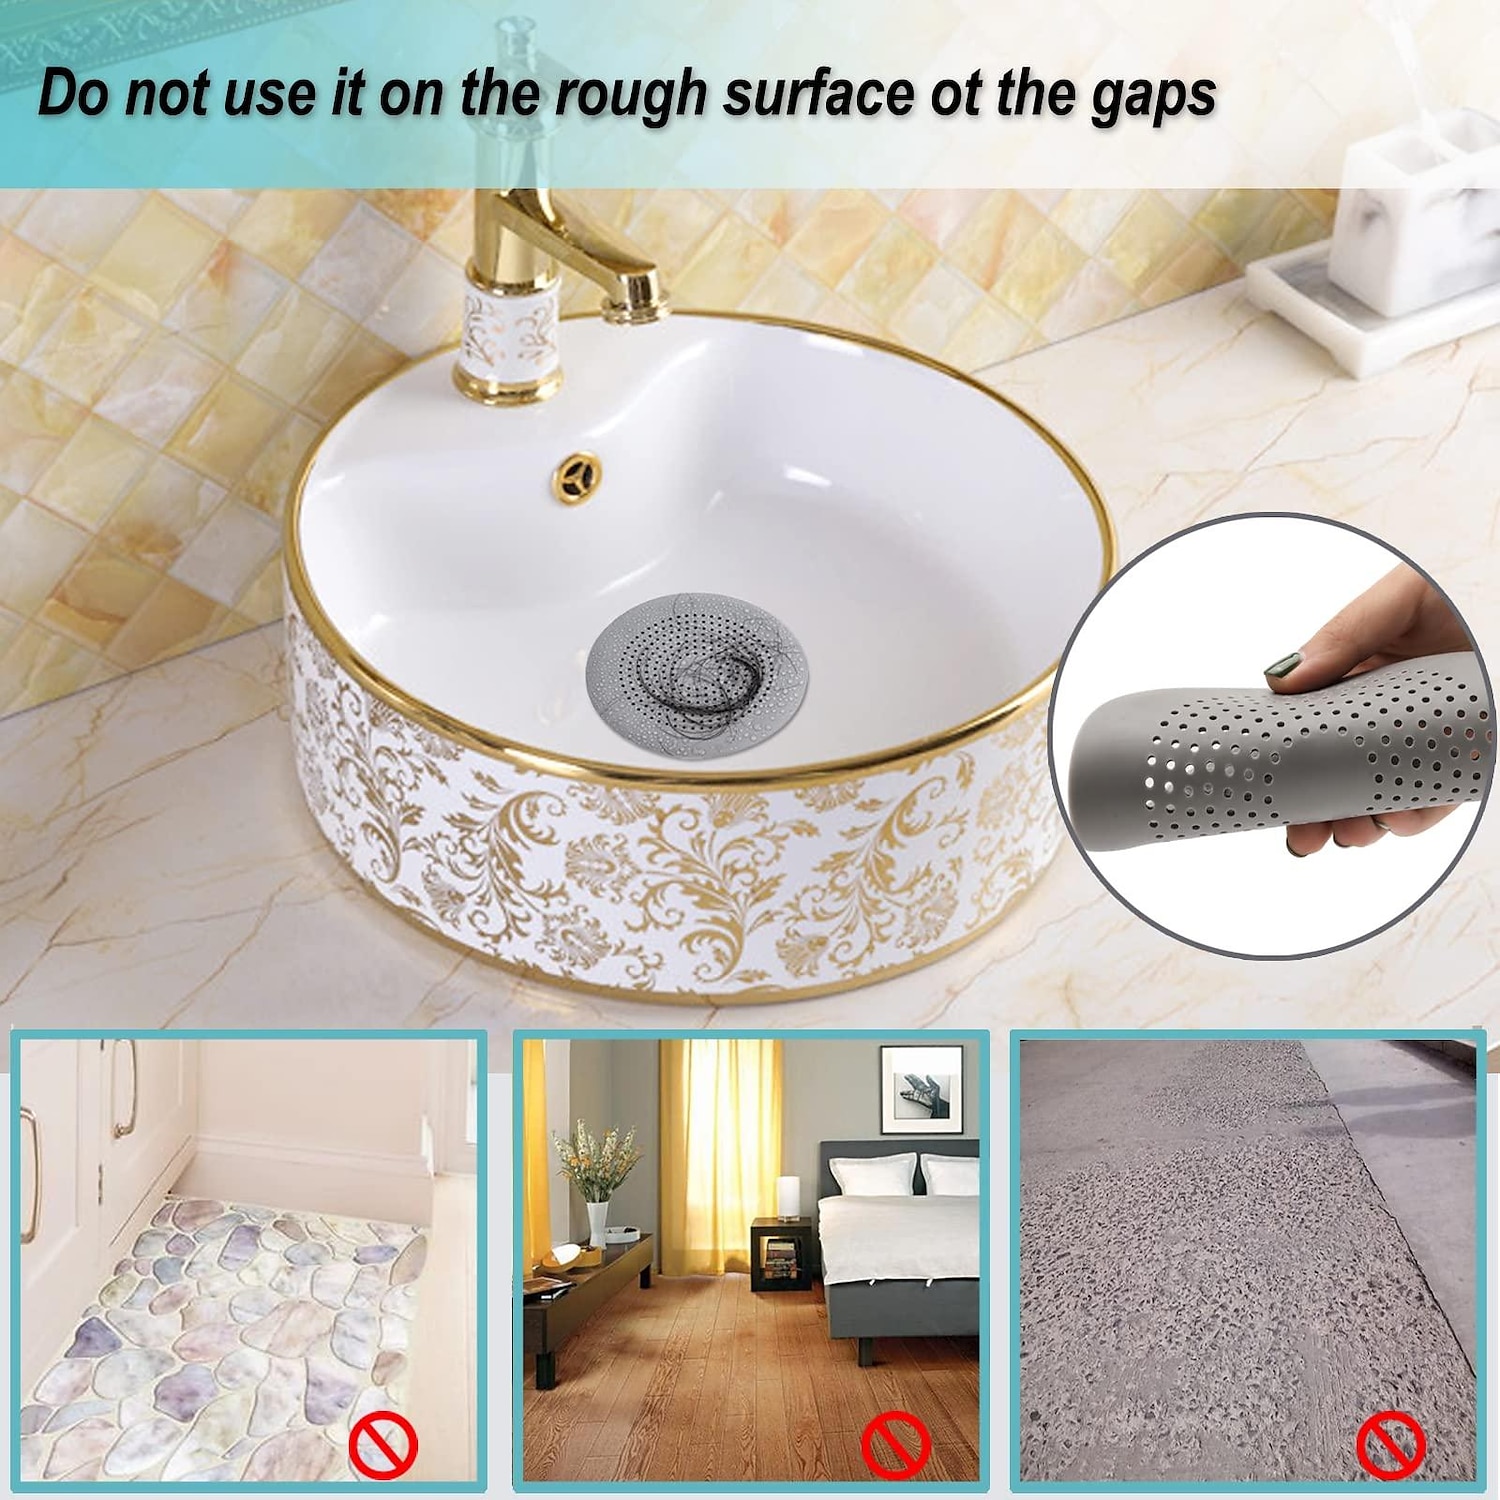 Hair Drain Catcher,Square Drain Cover for Shower Silicone Hair Stopper with Suction Cup,Easy to Install Suit for Bathroom,Bathtub,Kitchen 2 Pack